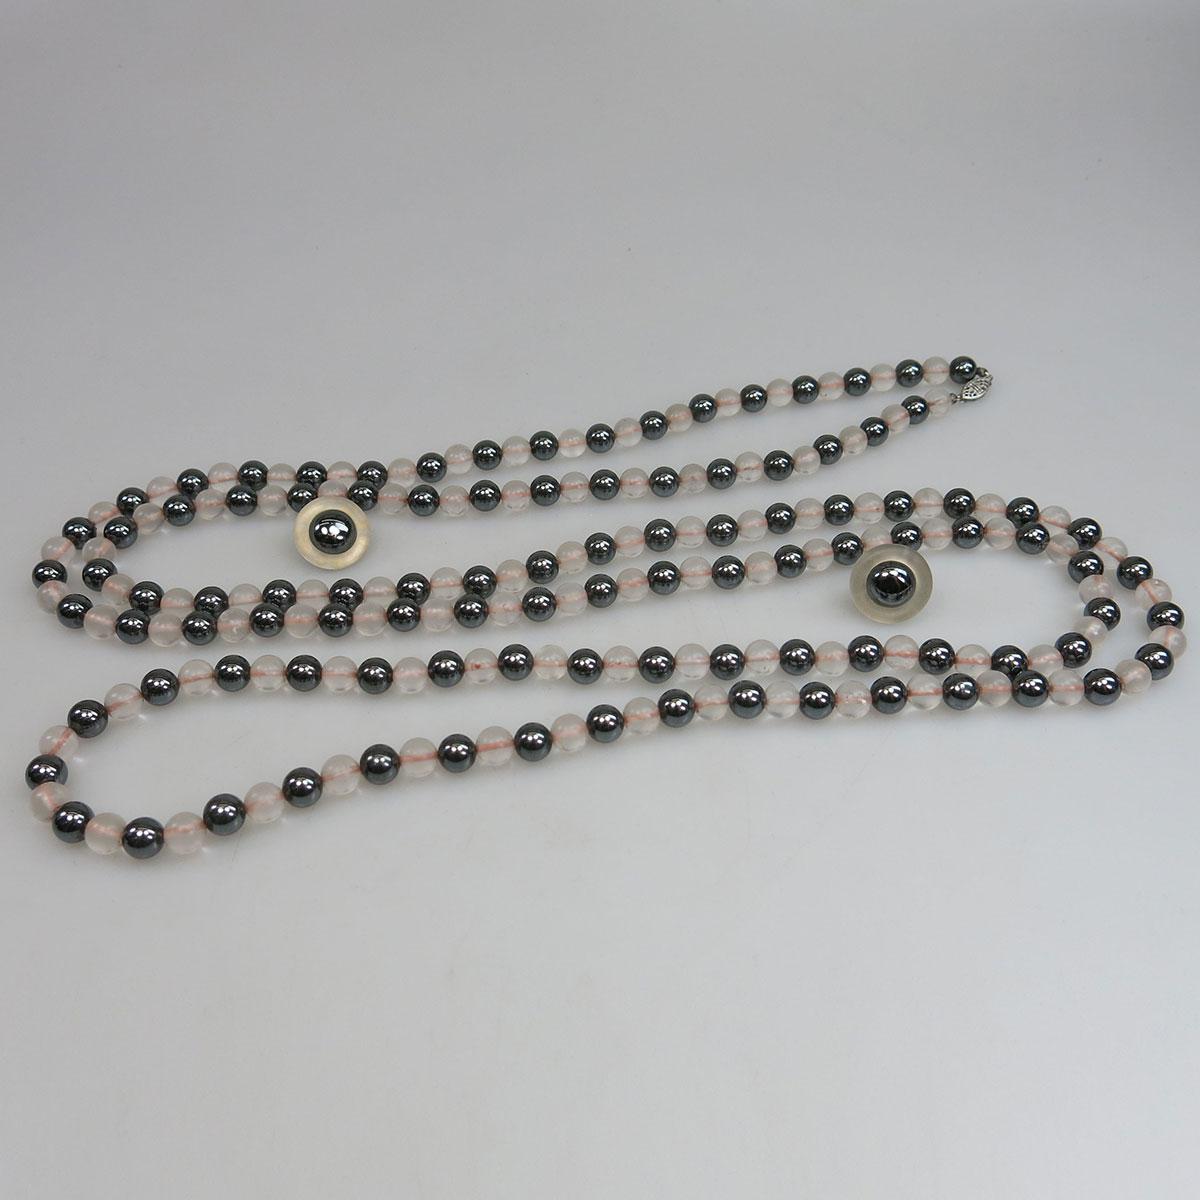 Hematite And Rock Crystal Bead Necklace